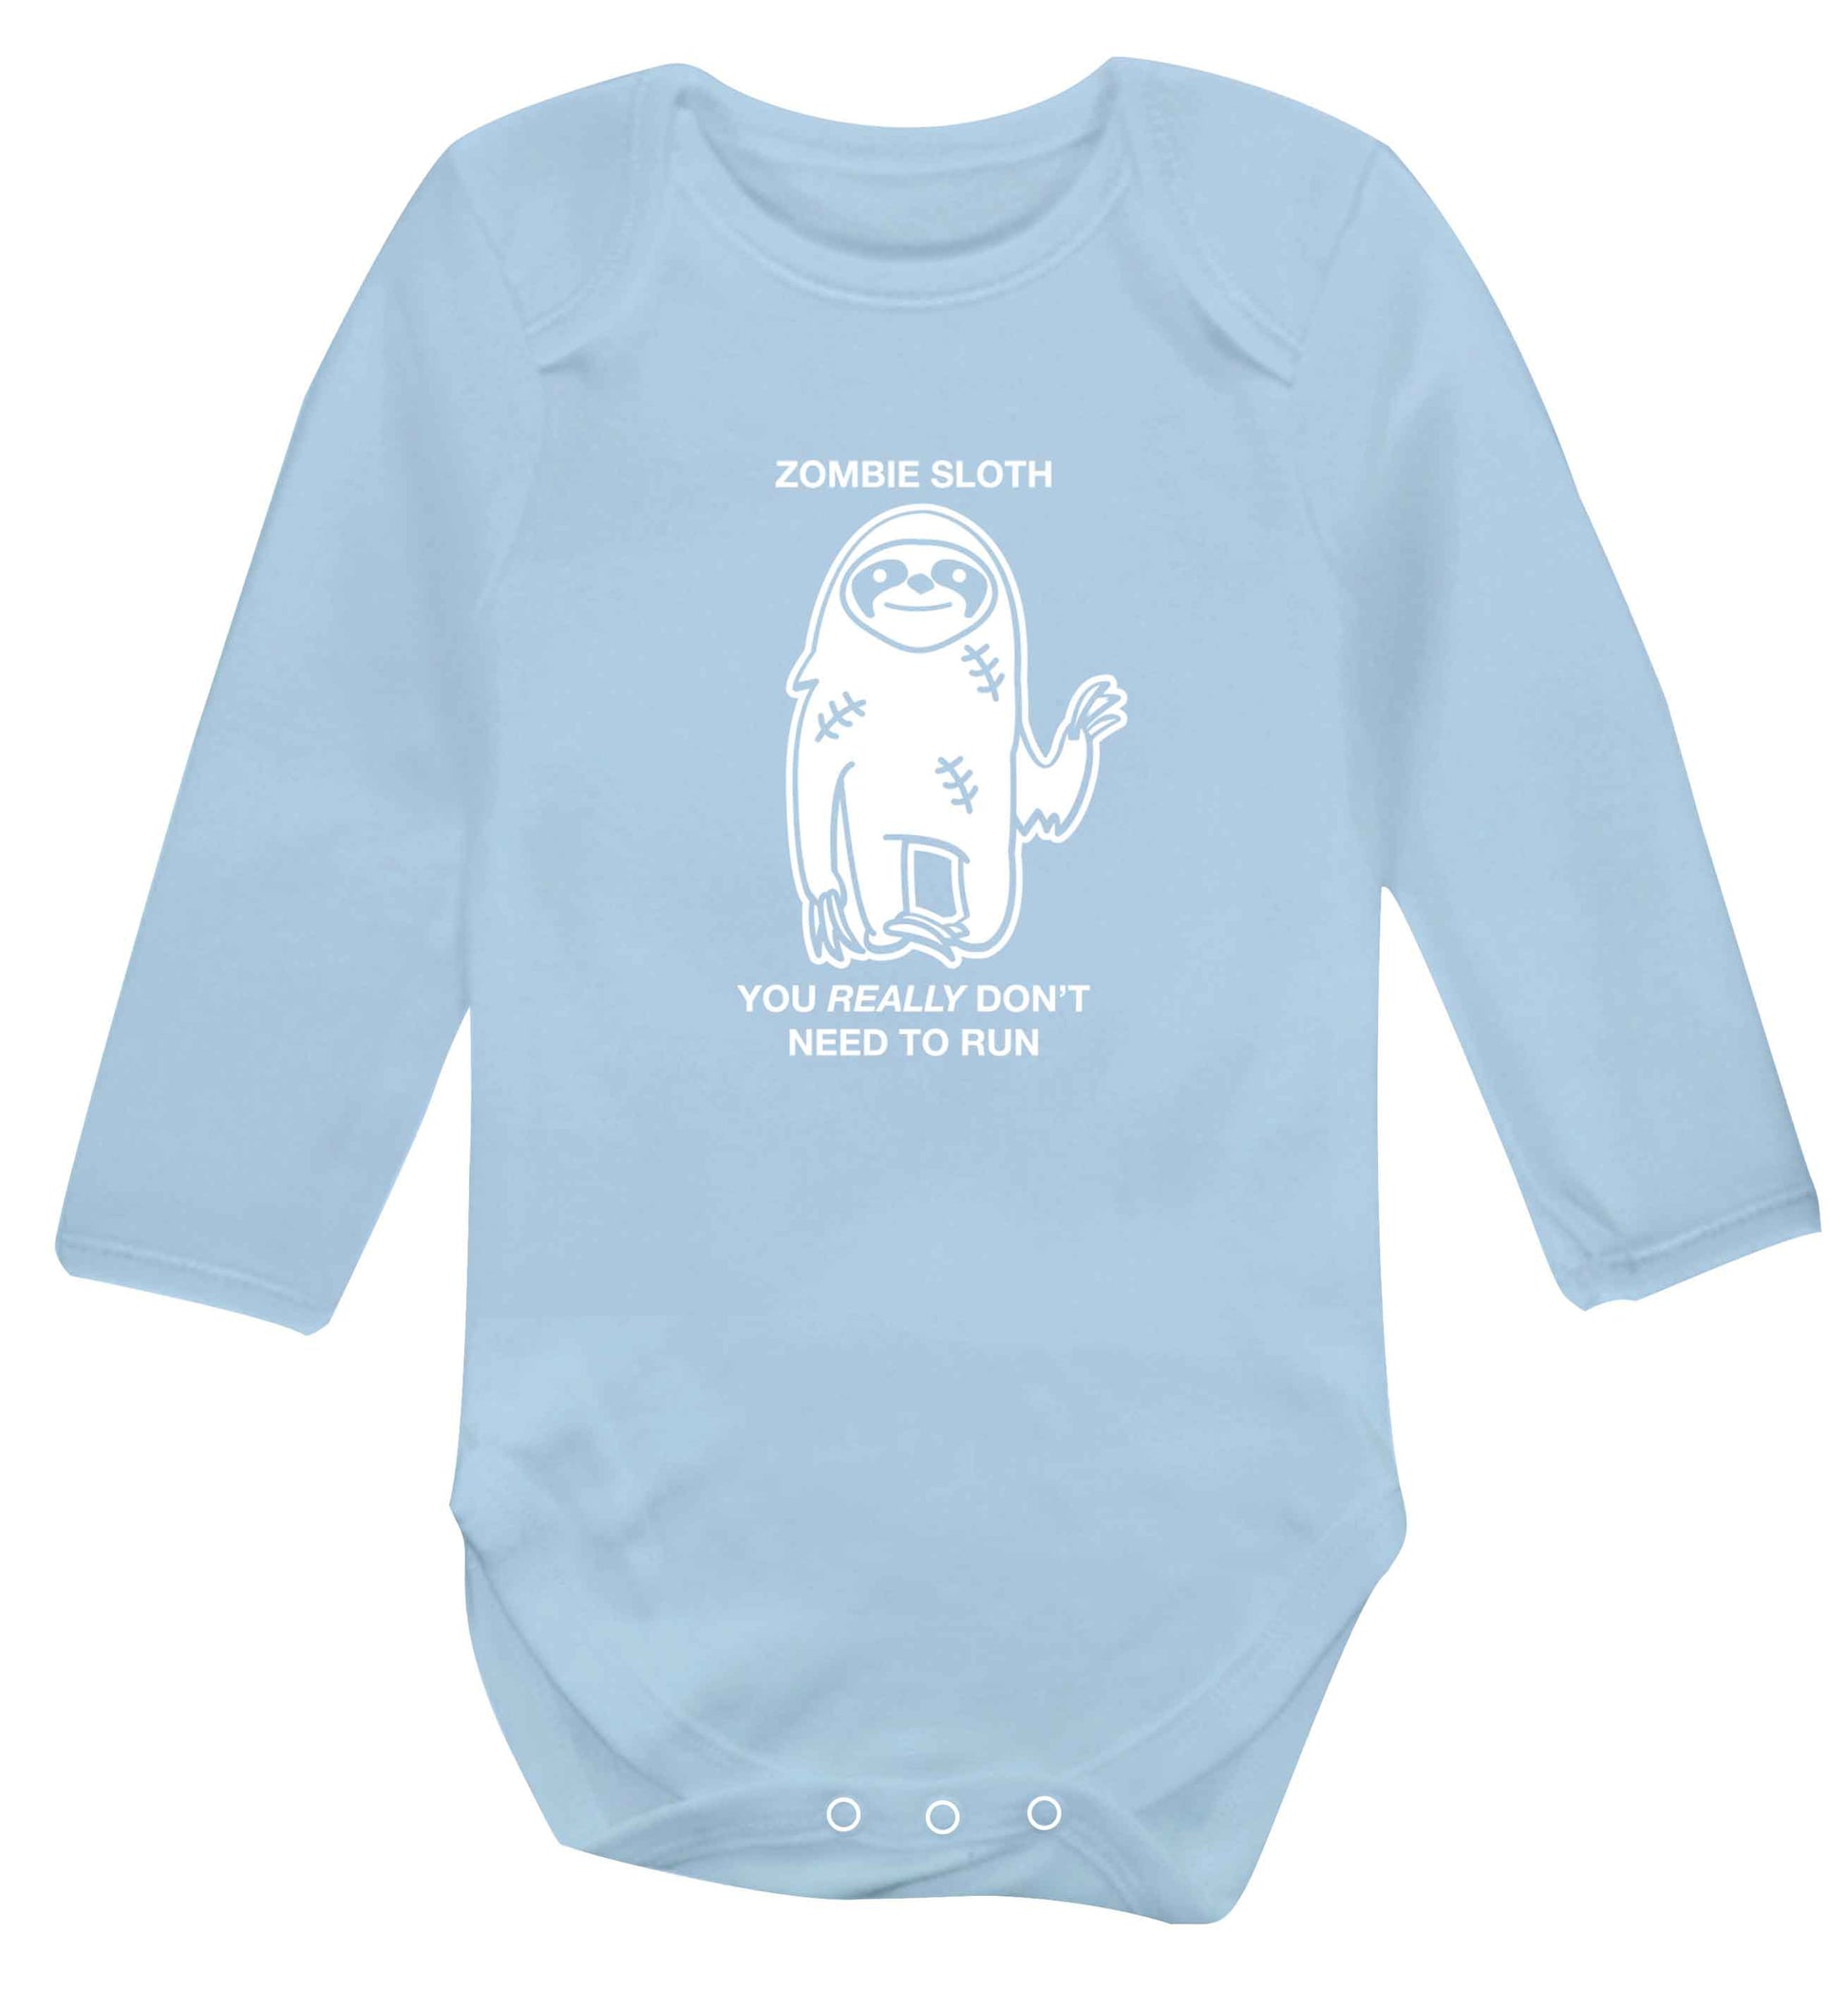 Zombie sloth you really don't need to run baby vest long sleeved pale blue 6-12 months